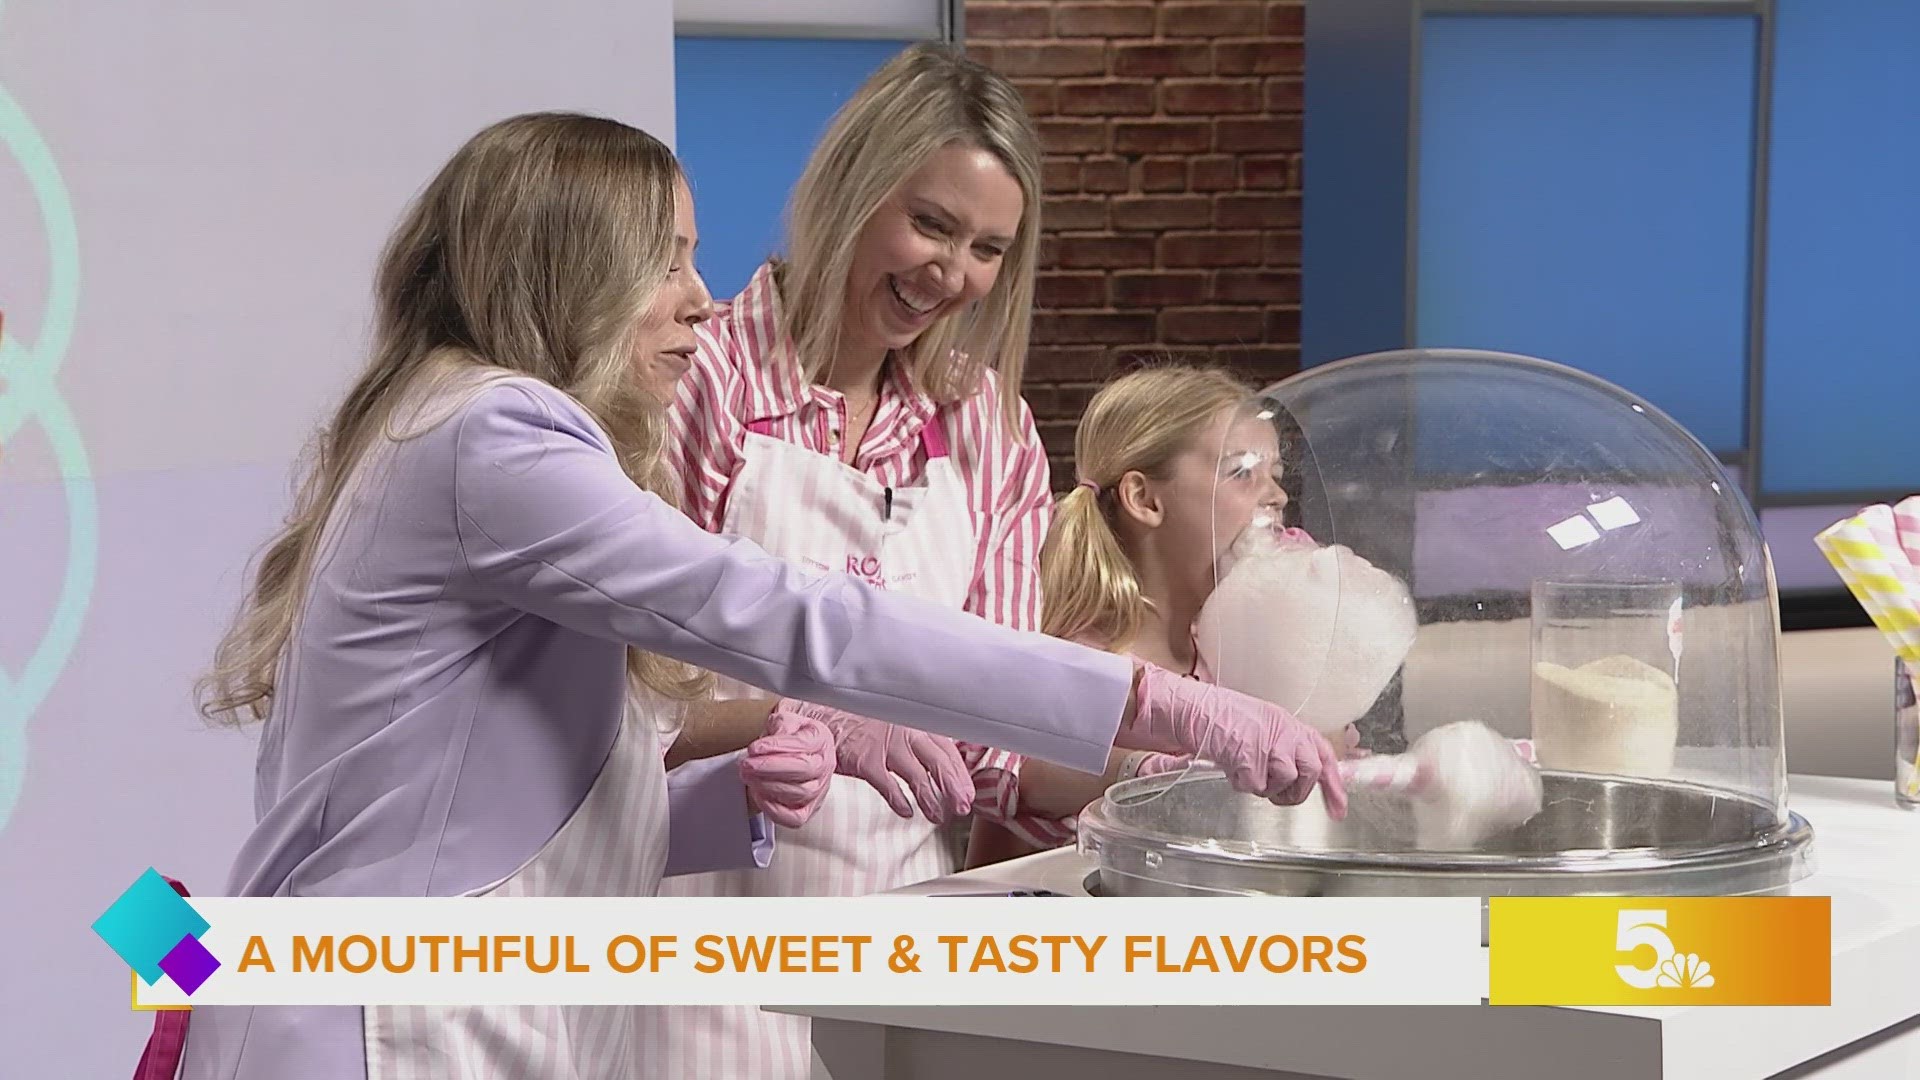 It's light, airy, and full of sugary goodness. Learn more about hand-spun cotton candy.